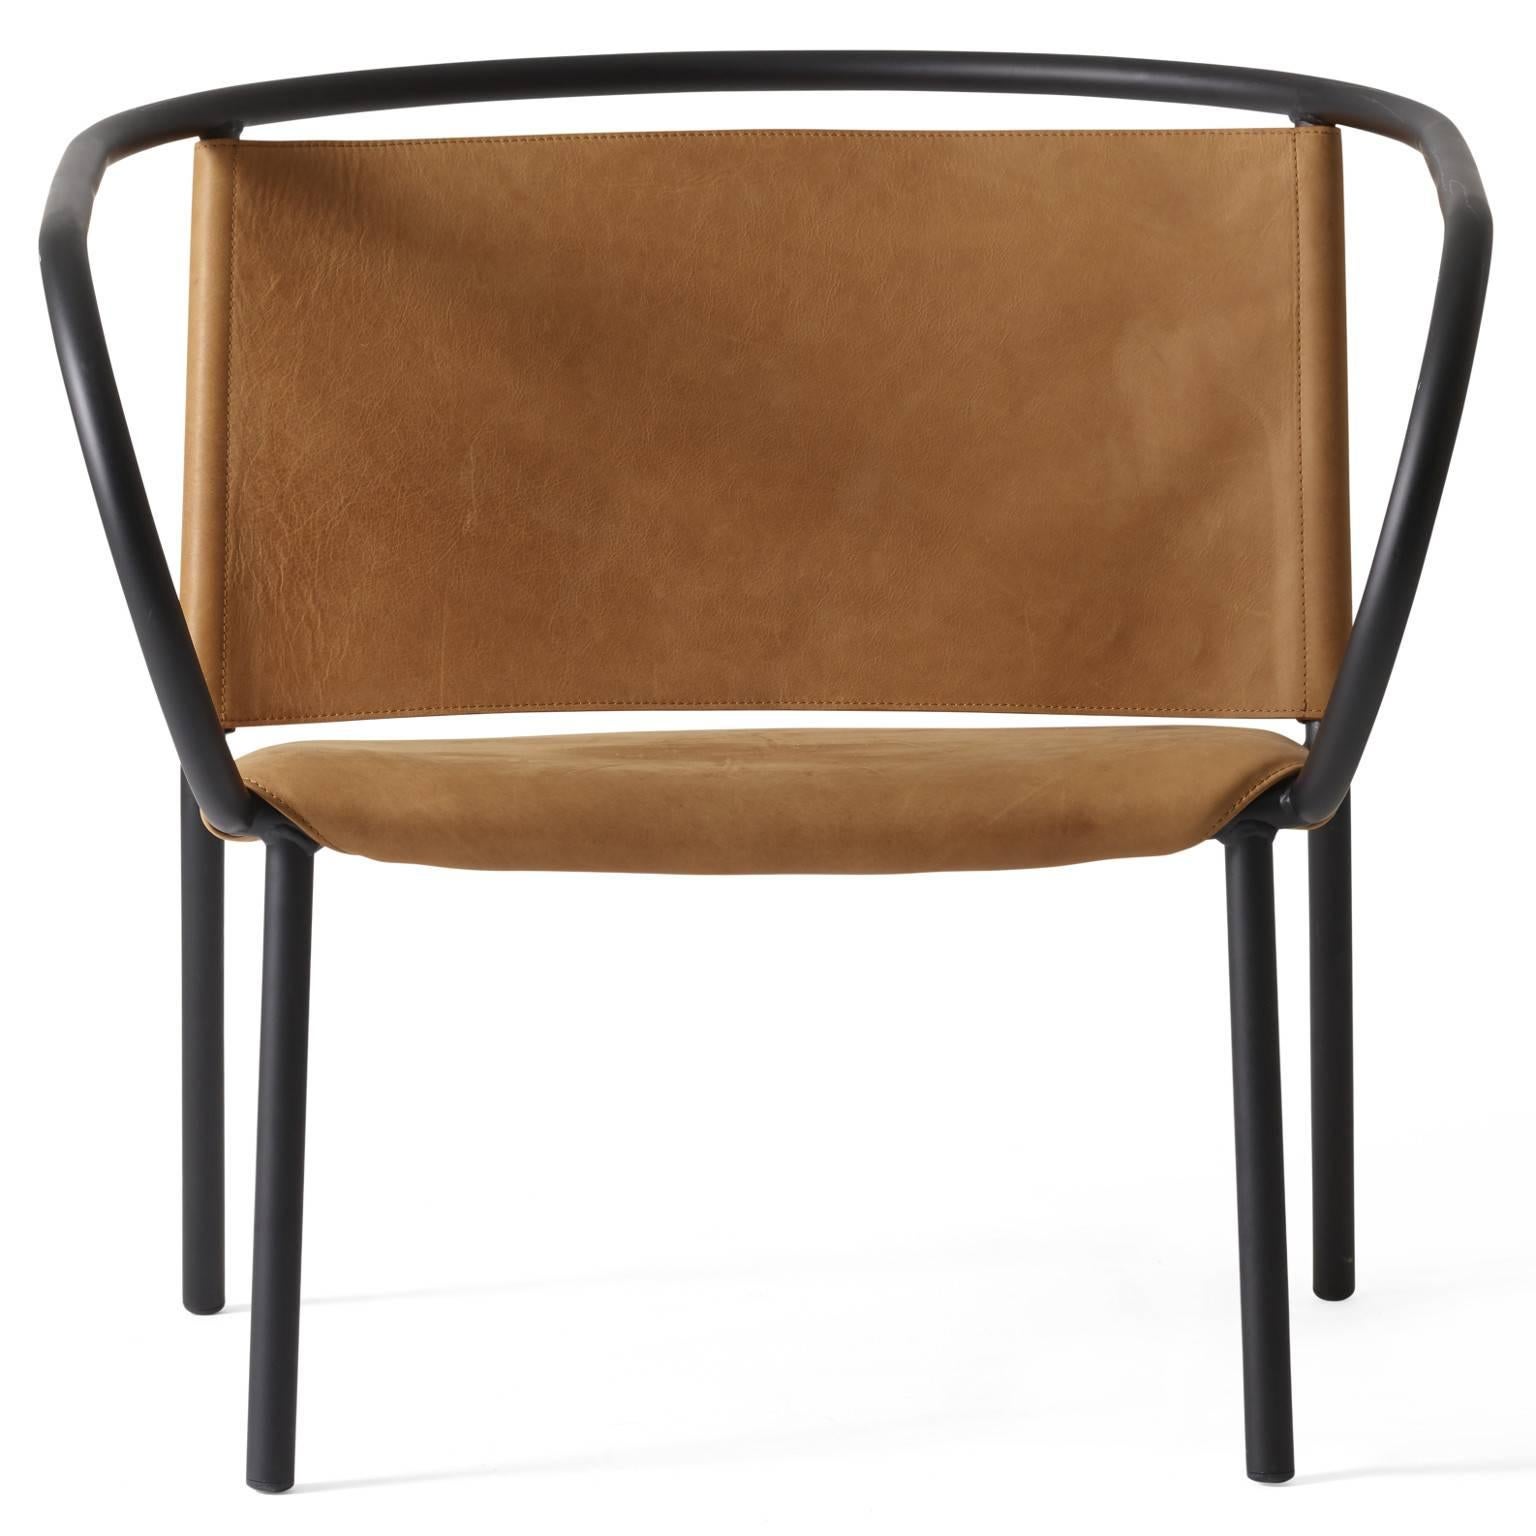 Combining the iconic to create the new. The two newcomers from Afteroom, the lounge vhair and the dining vhair, are the result of combining the inspiration from two iconic chairs of early modernism. The 'Thonet Bentwood Armchair' by Michael Thonet